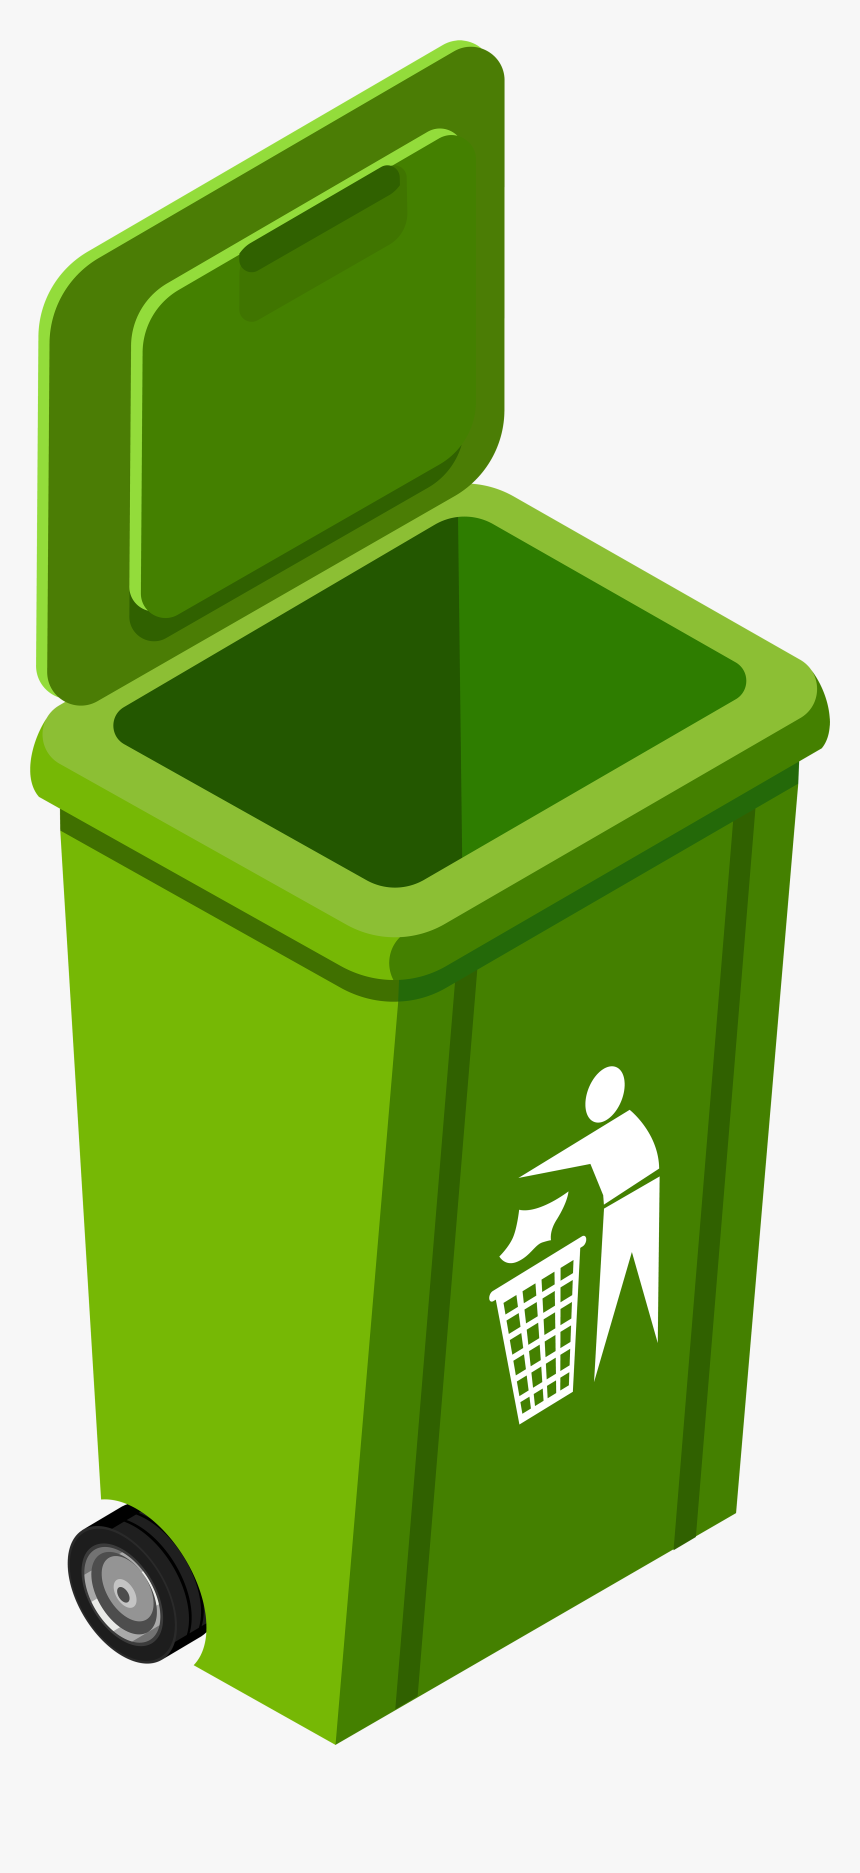 Throwing Bin Stock Vector Illustration and Royalty Free Throwing Bin Clipart